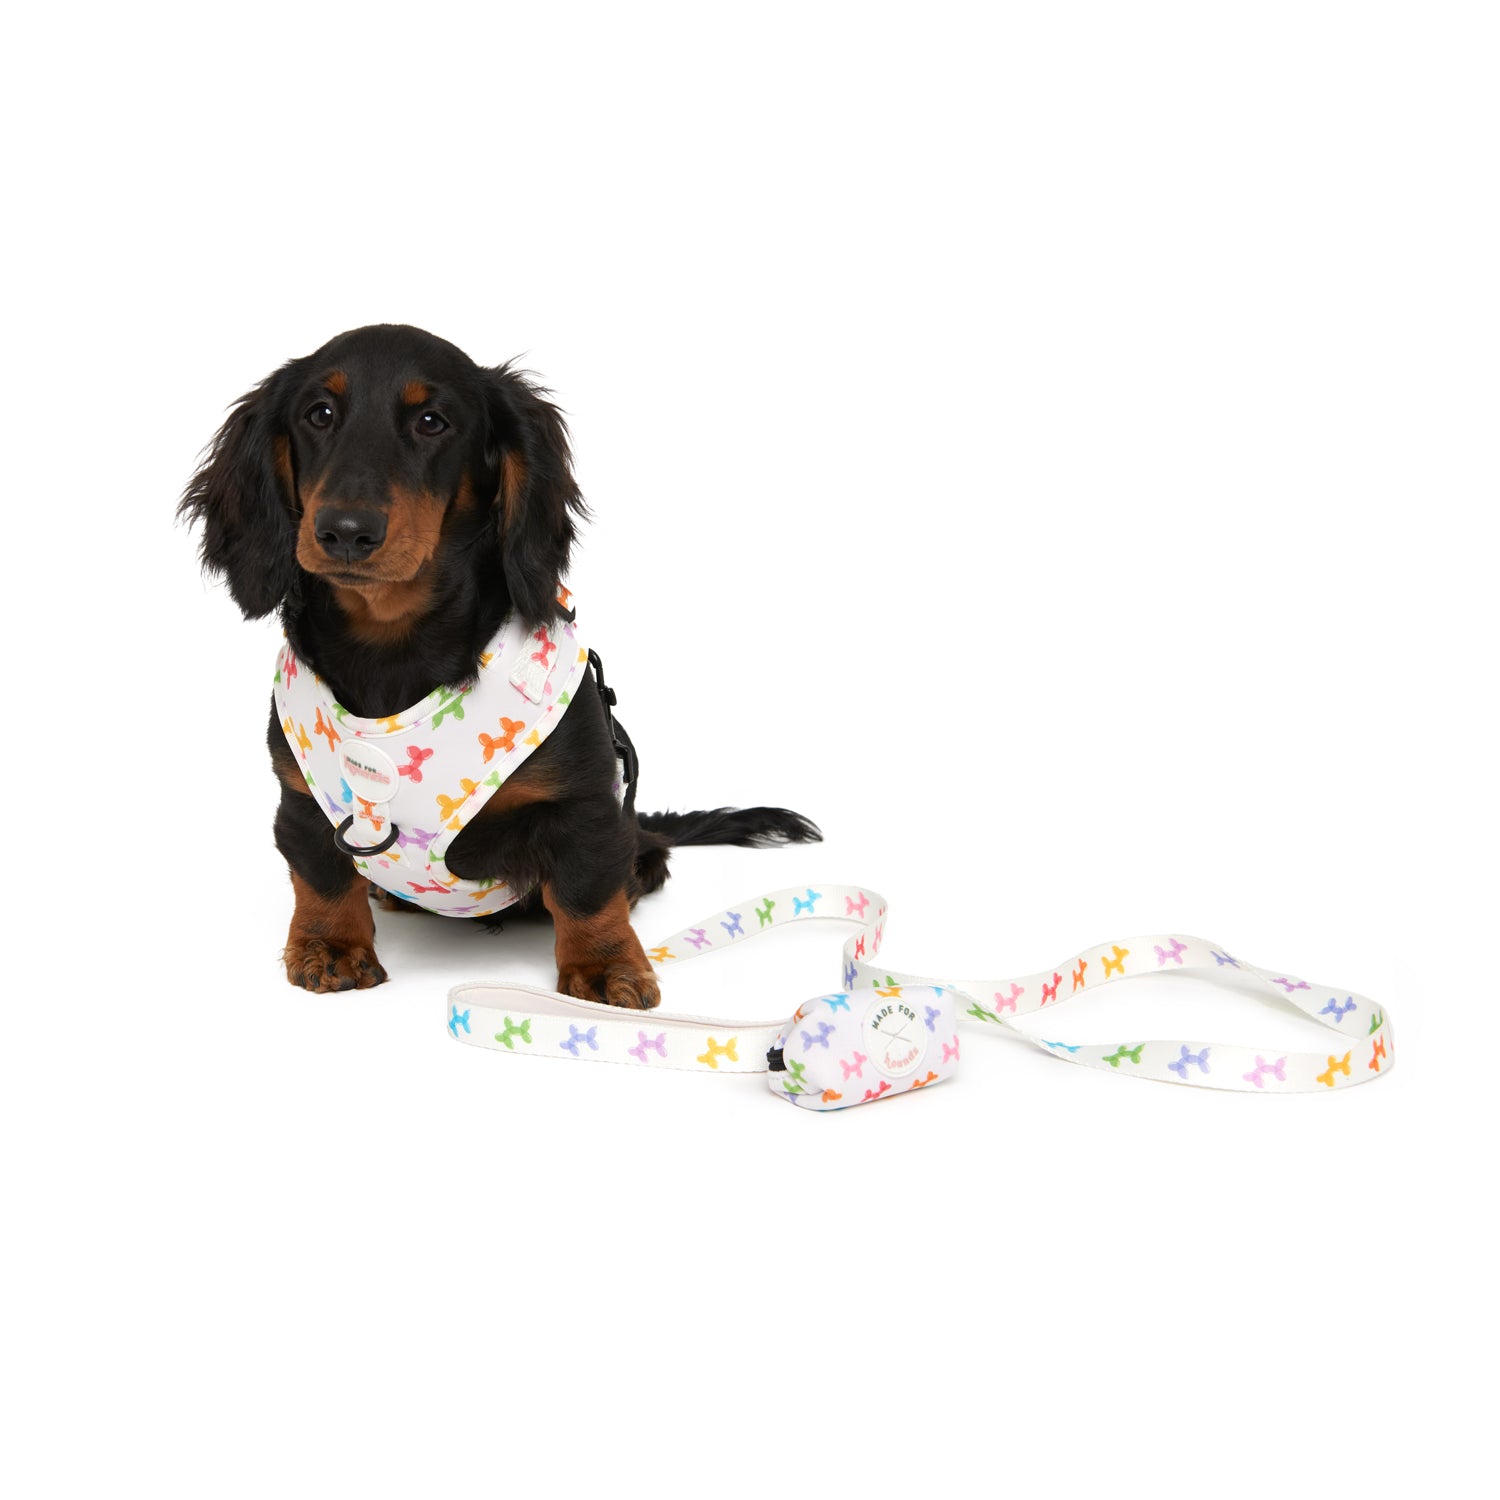 Hug-A-Dog Harness In Fabric & Mesh, Our Popular Mesh-Based Harness Gets  Fashionable With A Solid Fabric Overlay